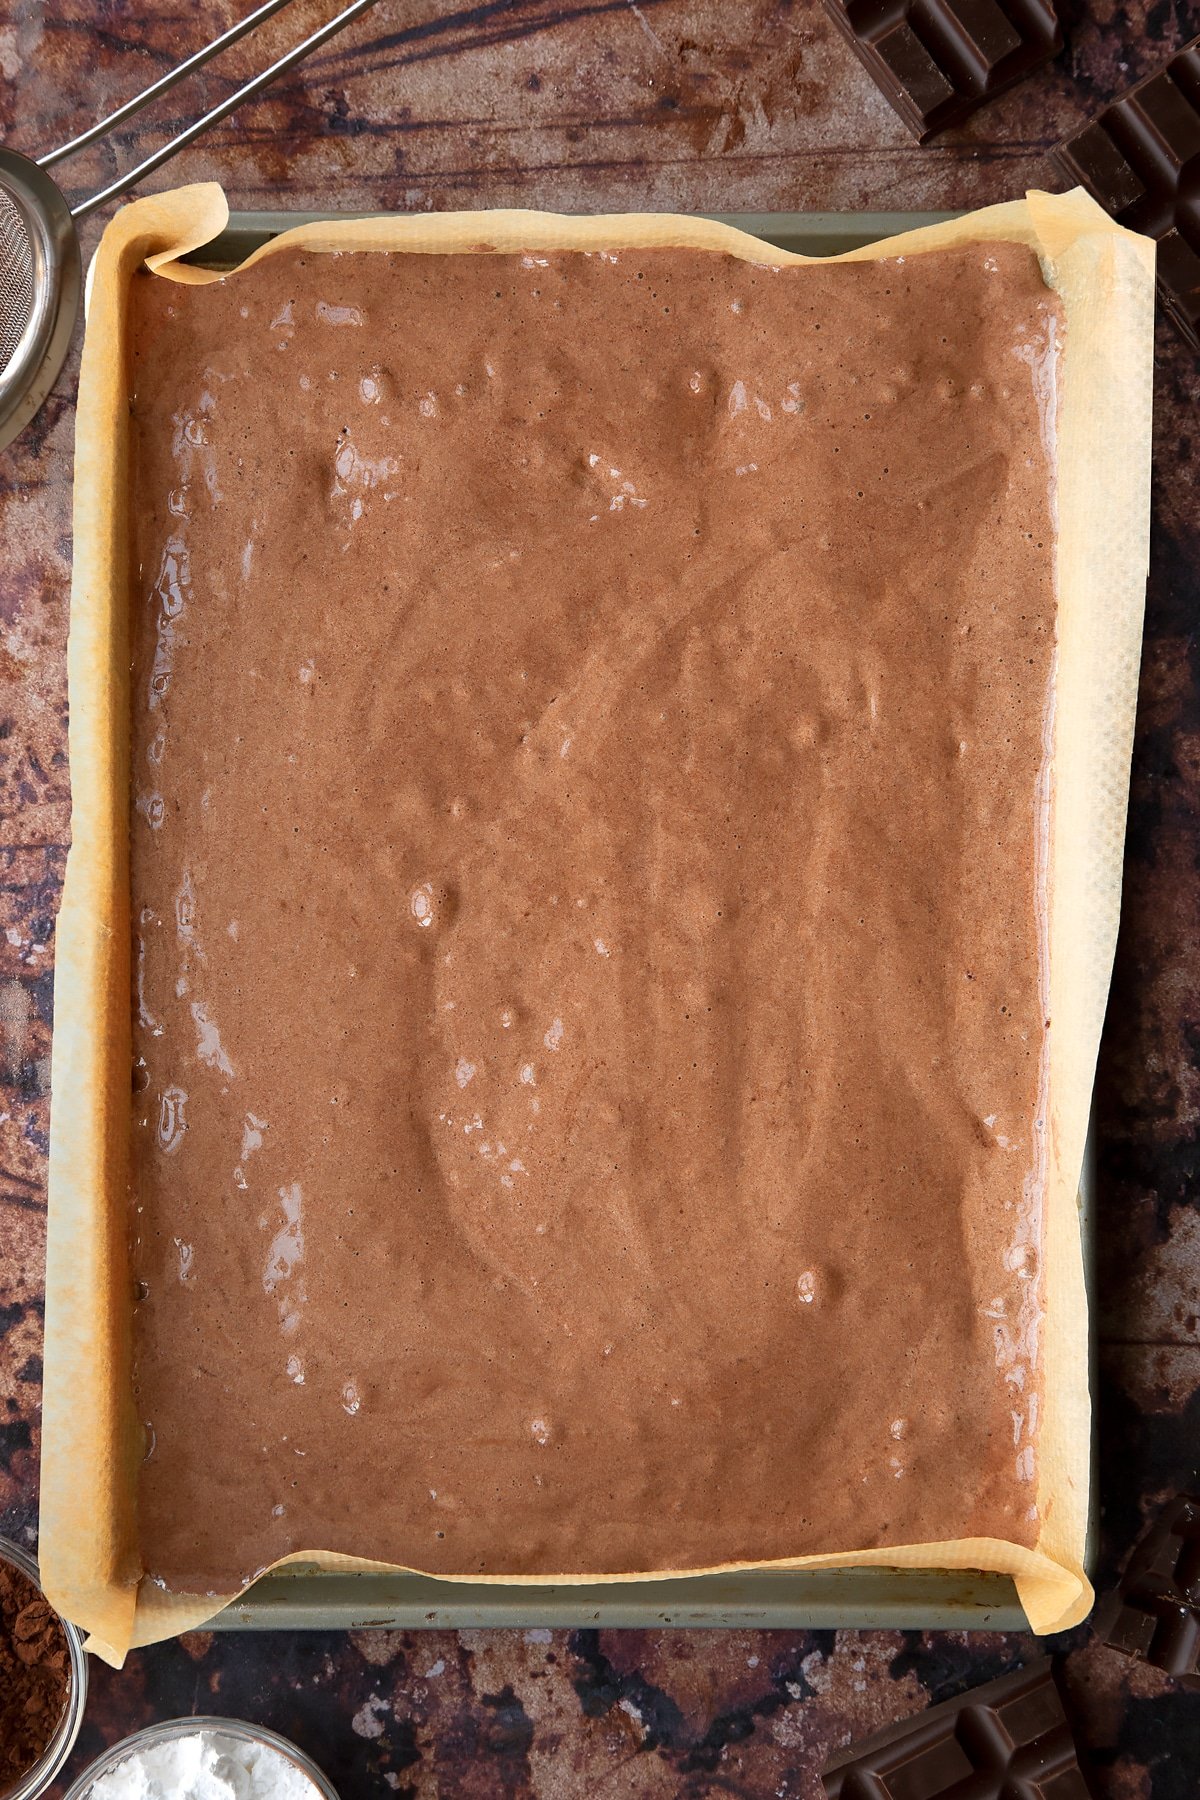 Chocolate sponge batter in a lined Swiss roll tray. Ingredients for the caterpillar cake recipe surround the tray.